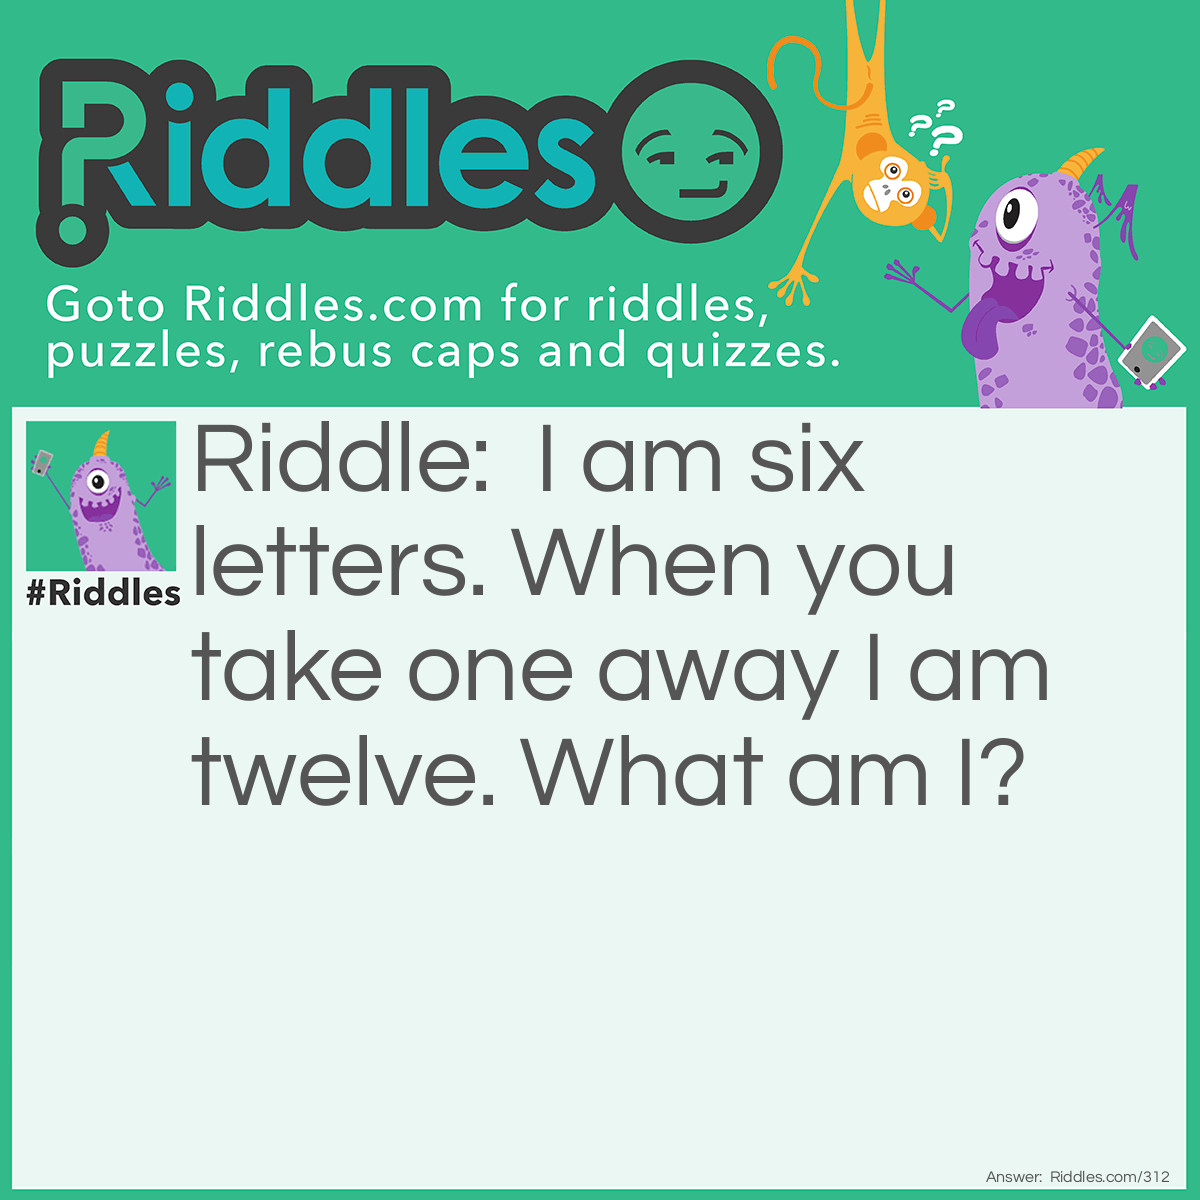 Riddle: I am six letters. When you take one away I am twelve. What am I? Answer: The word Dozens.